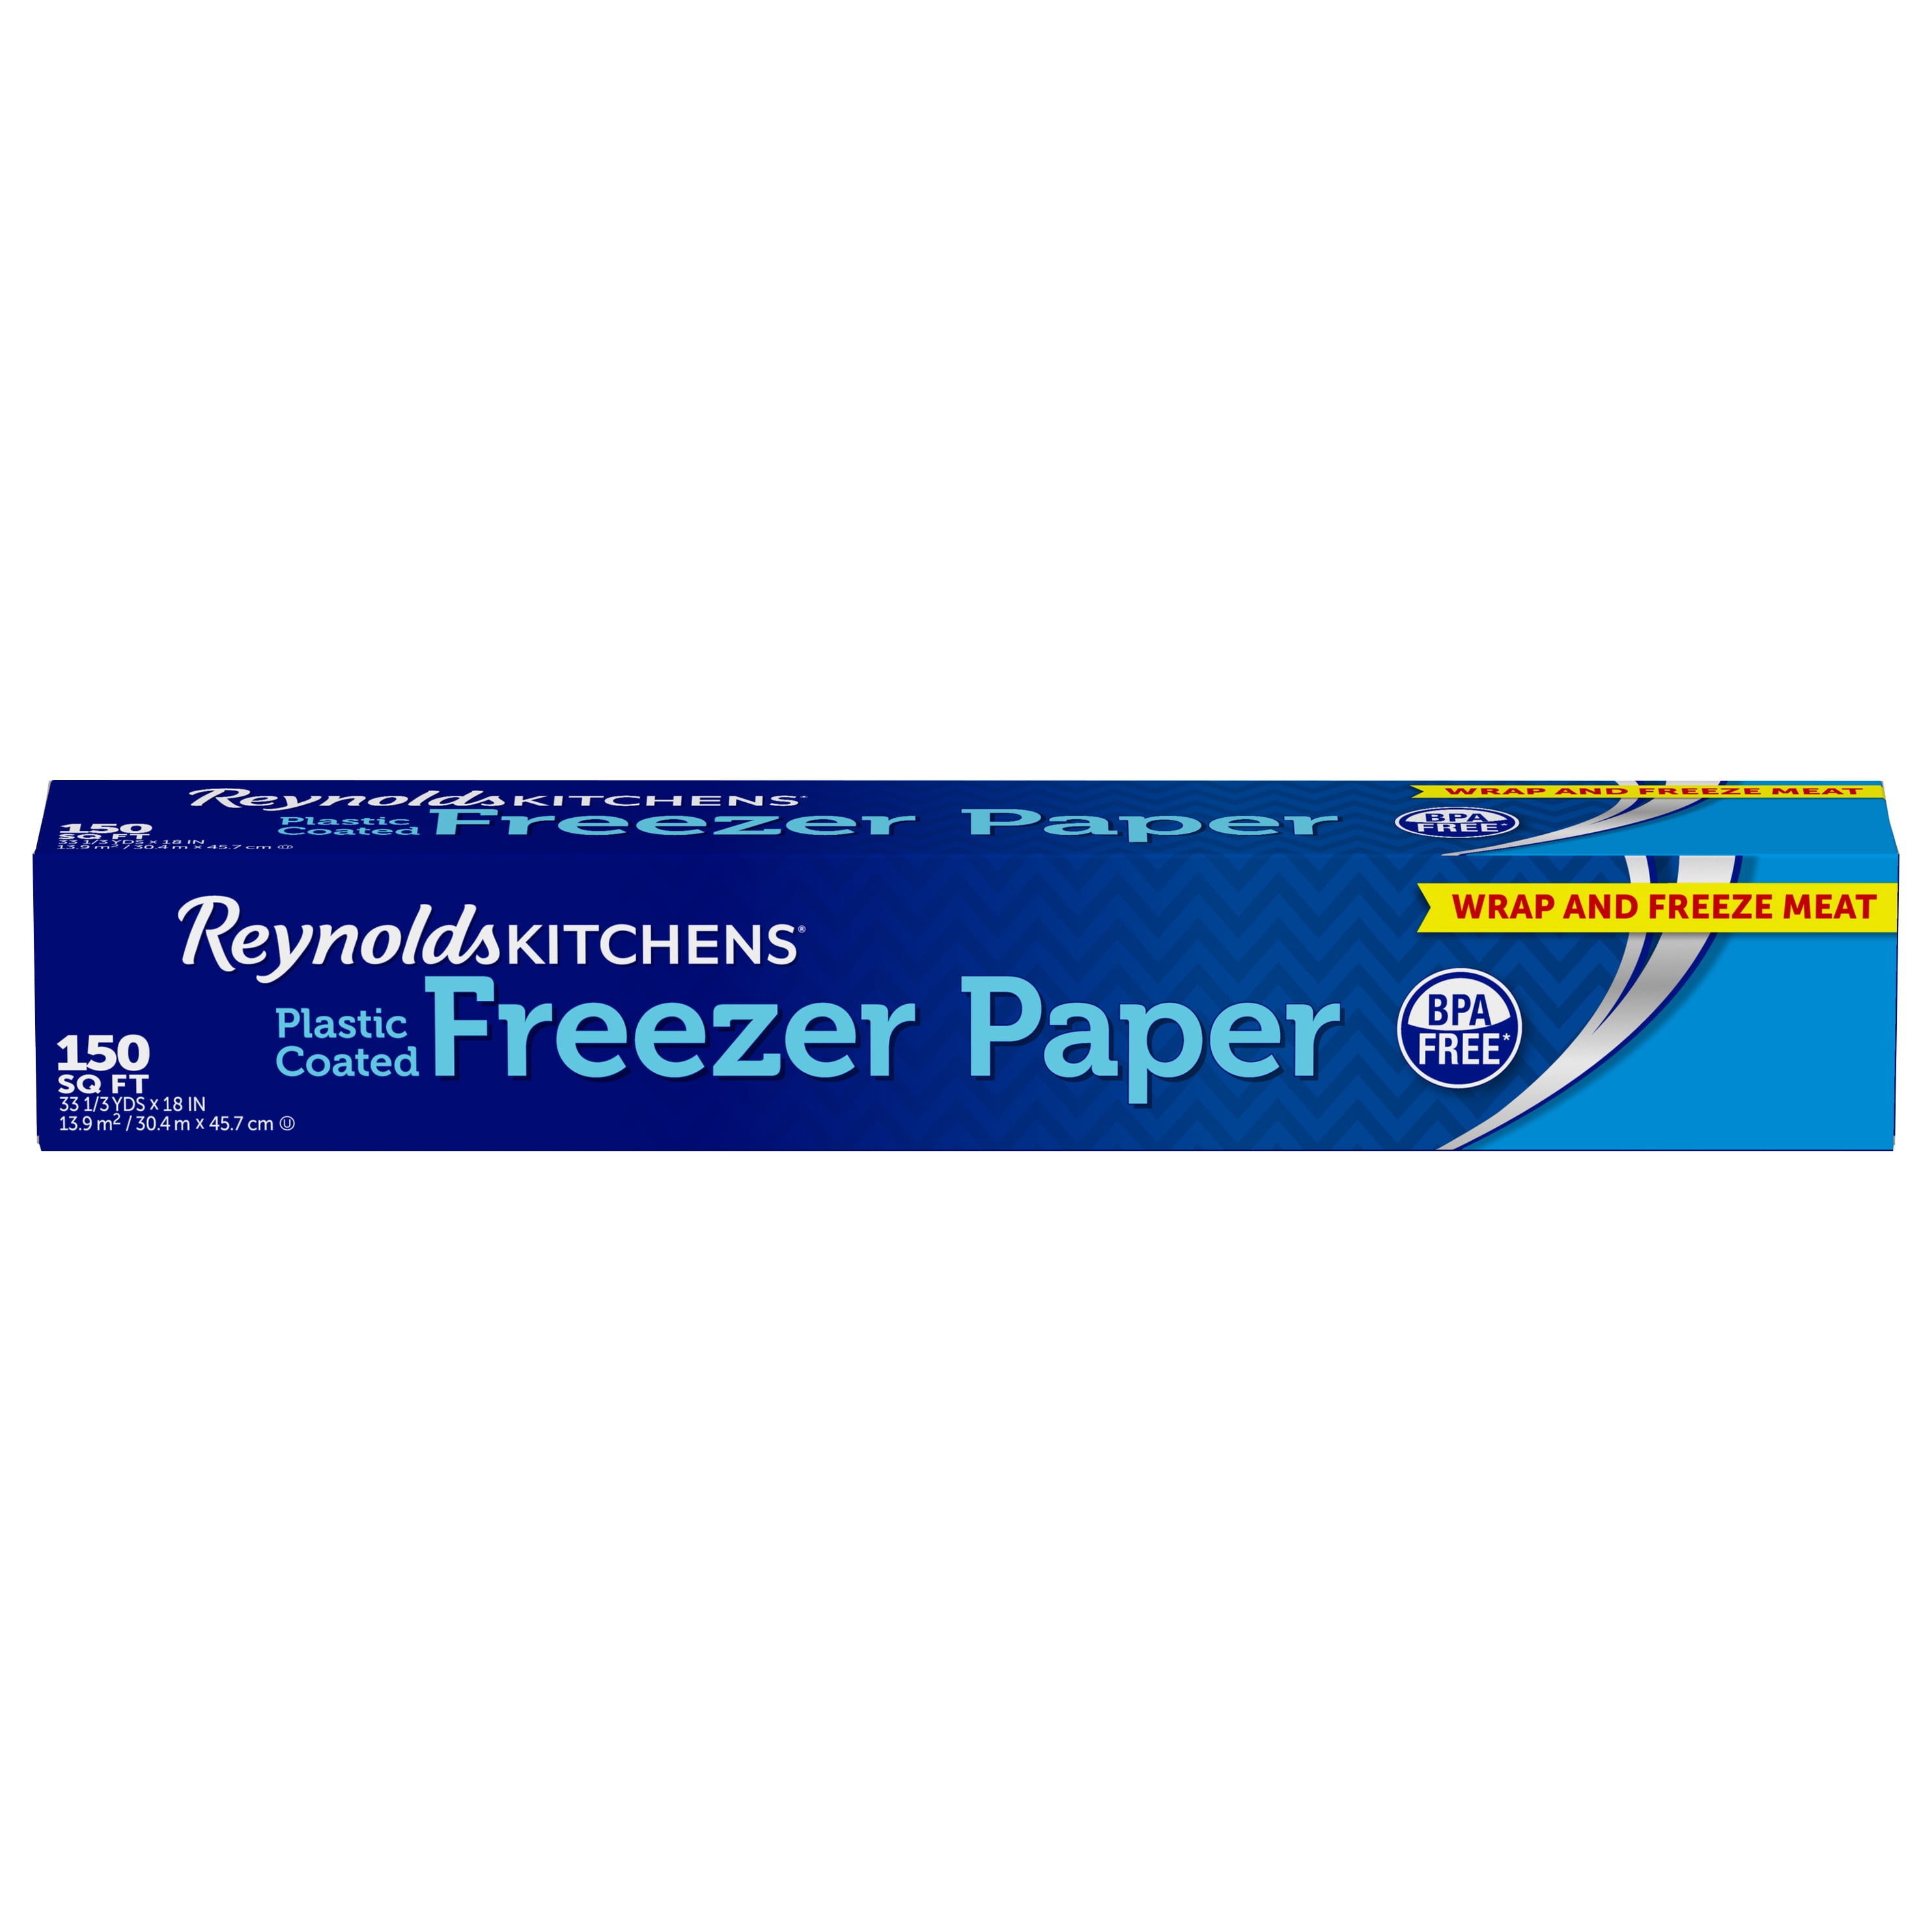 TIL that instead of paying for release paper (which I find expensive), I  can just buy a $1 roll of contact paper and use the backing that it comes  on! I cut